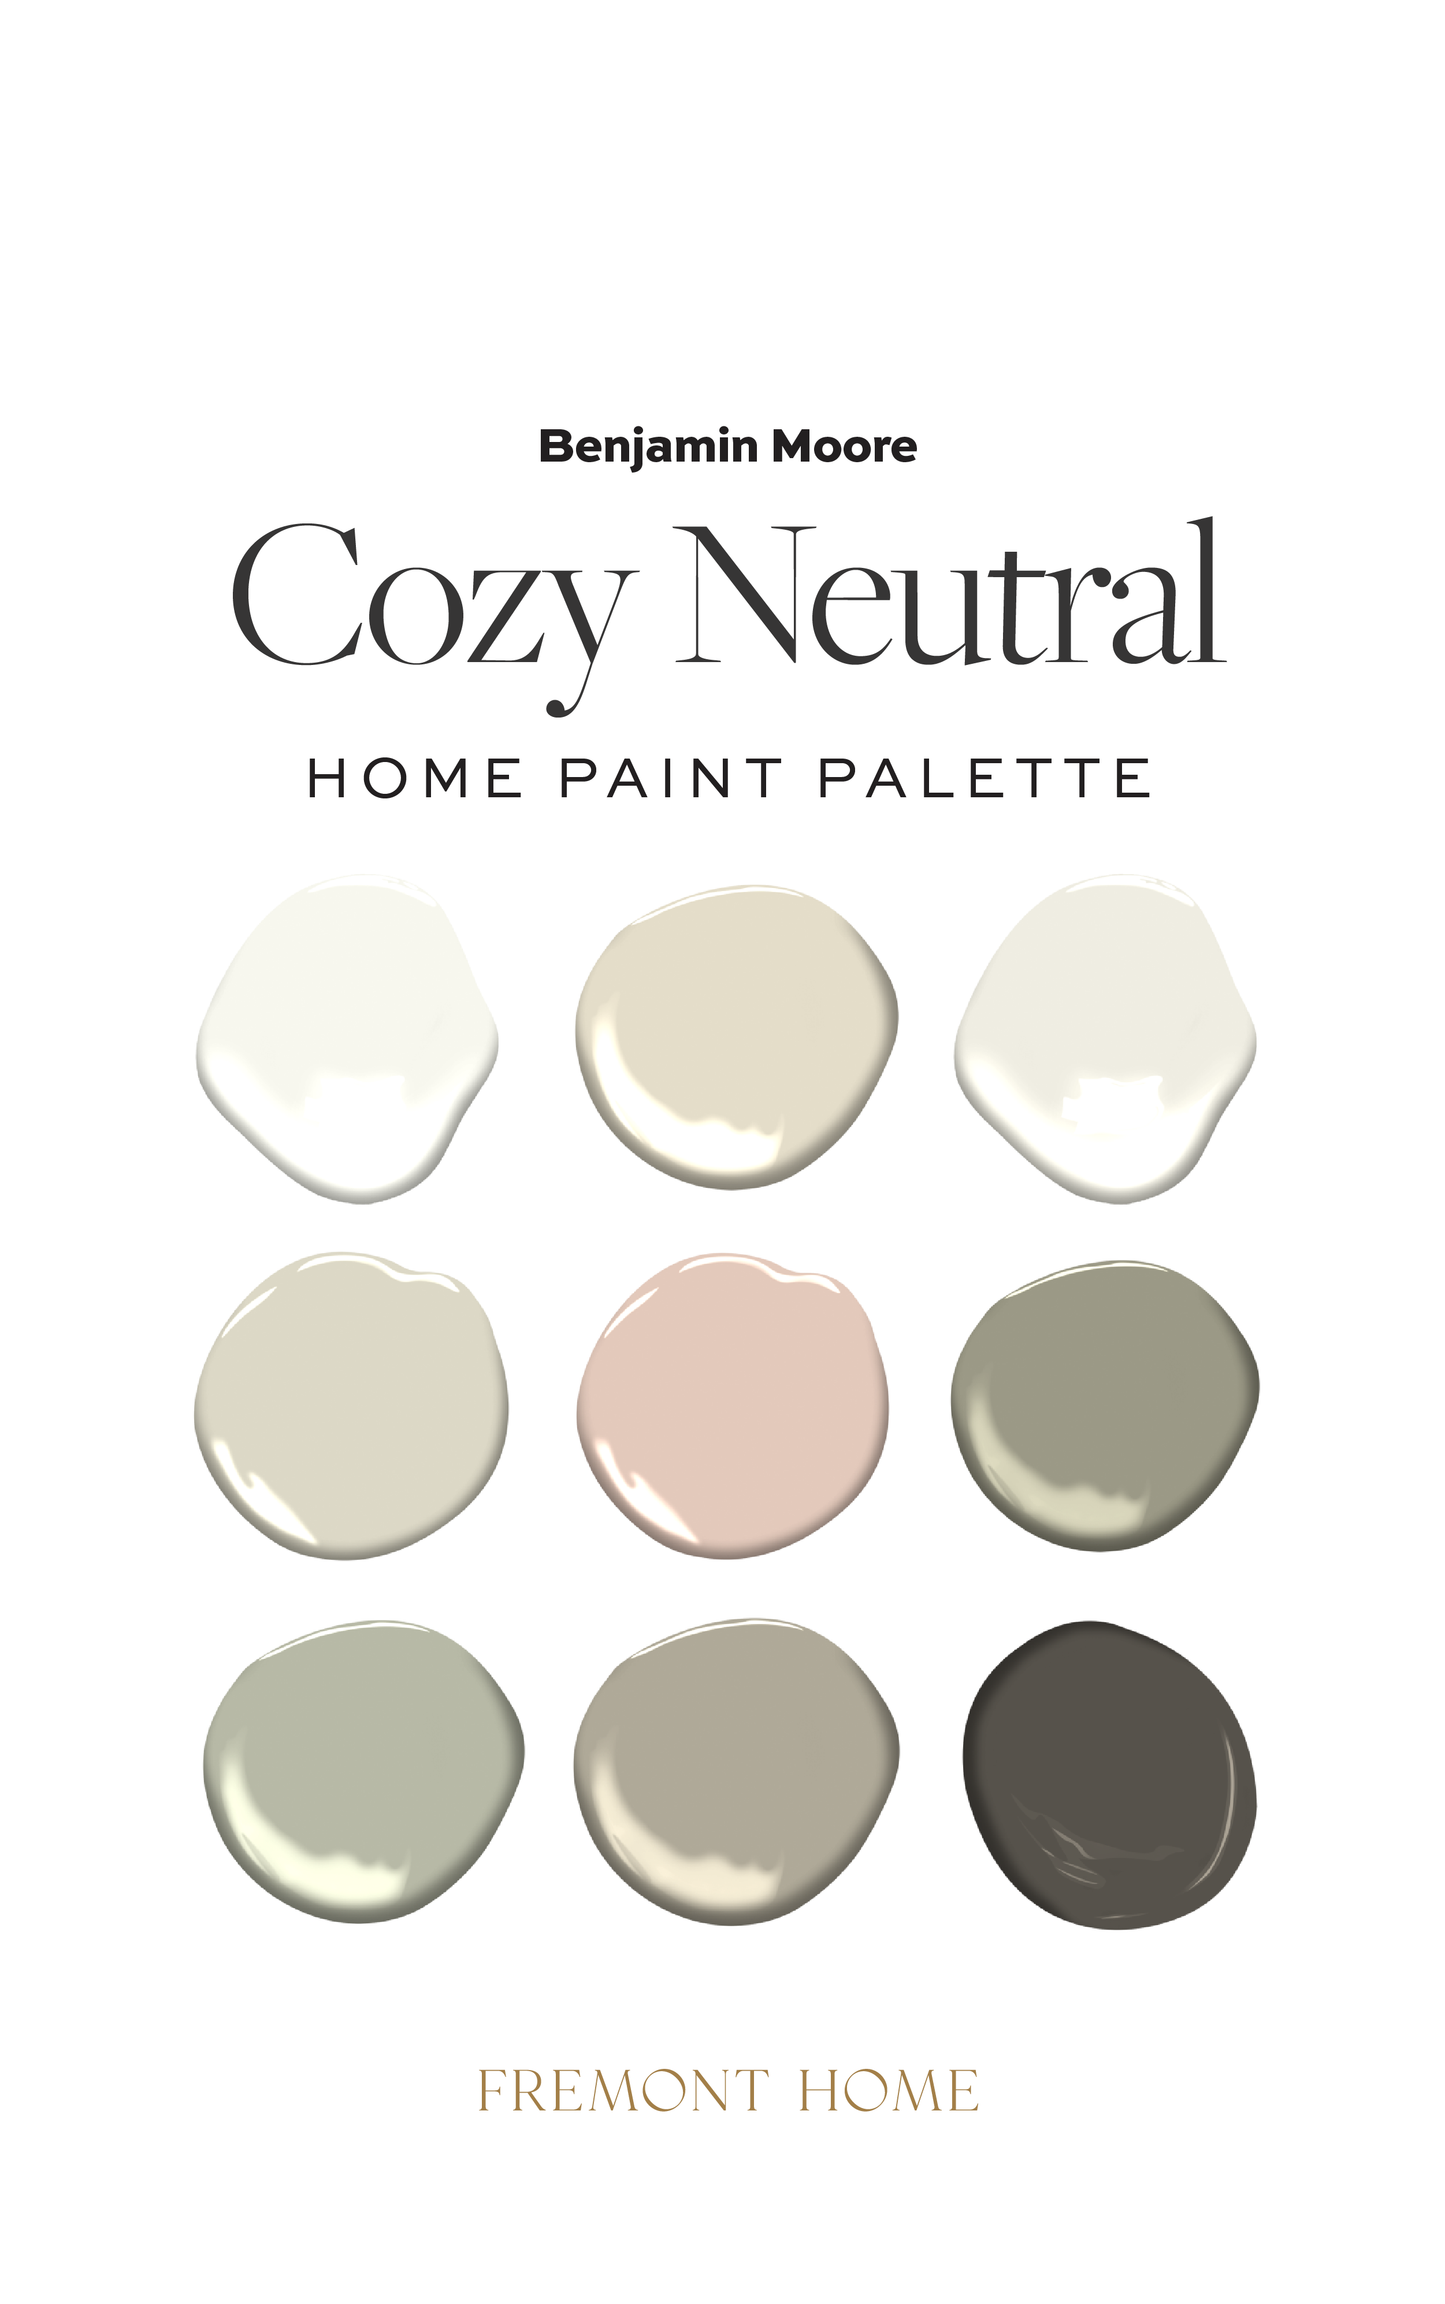 Smokey Taupe Benjamin Moore Paint Palette Soft Neutral Paint Colors for  Home, Interior Design Paint Scheme, Wrought Iron -  Canada